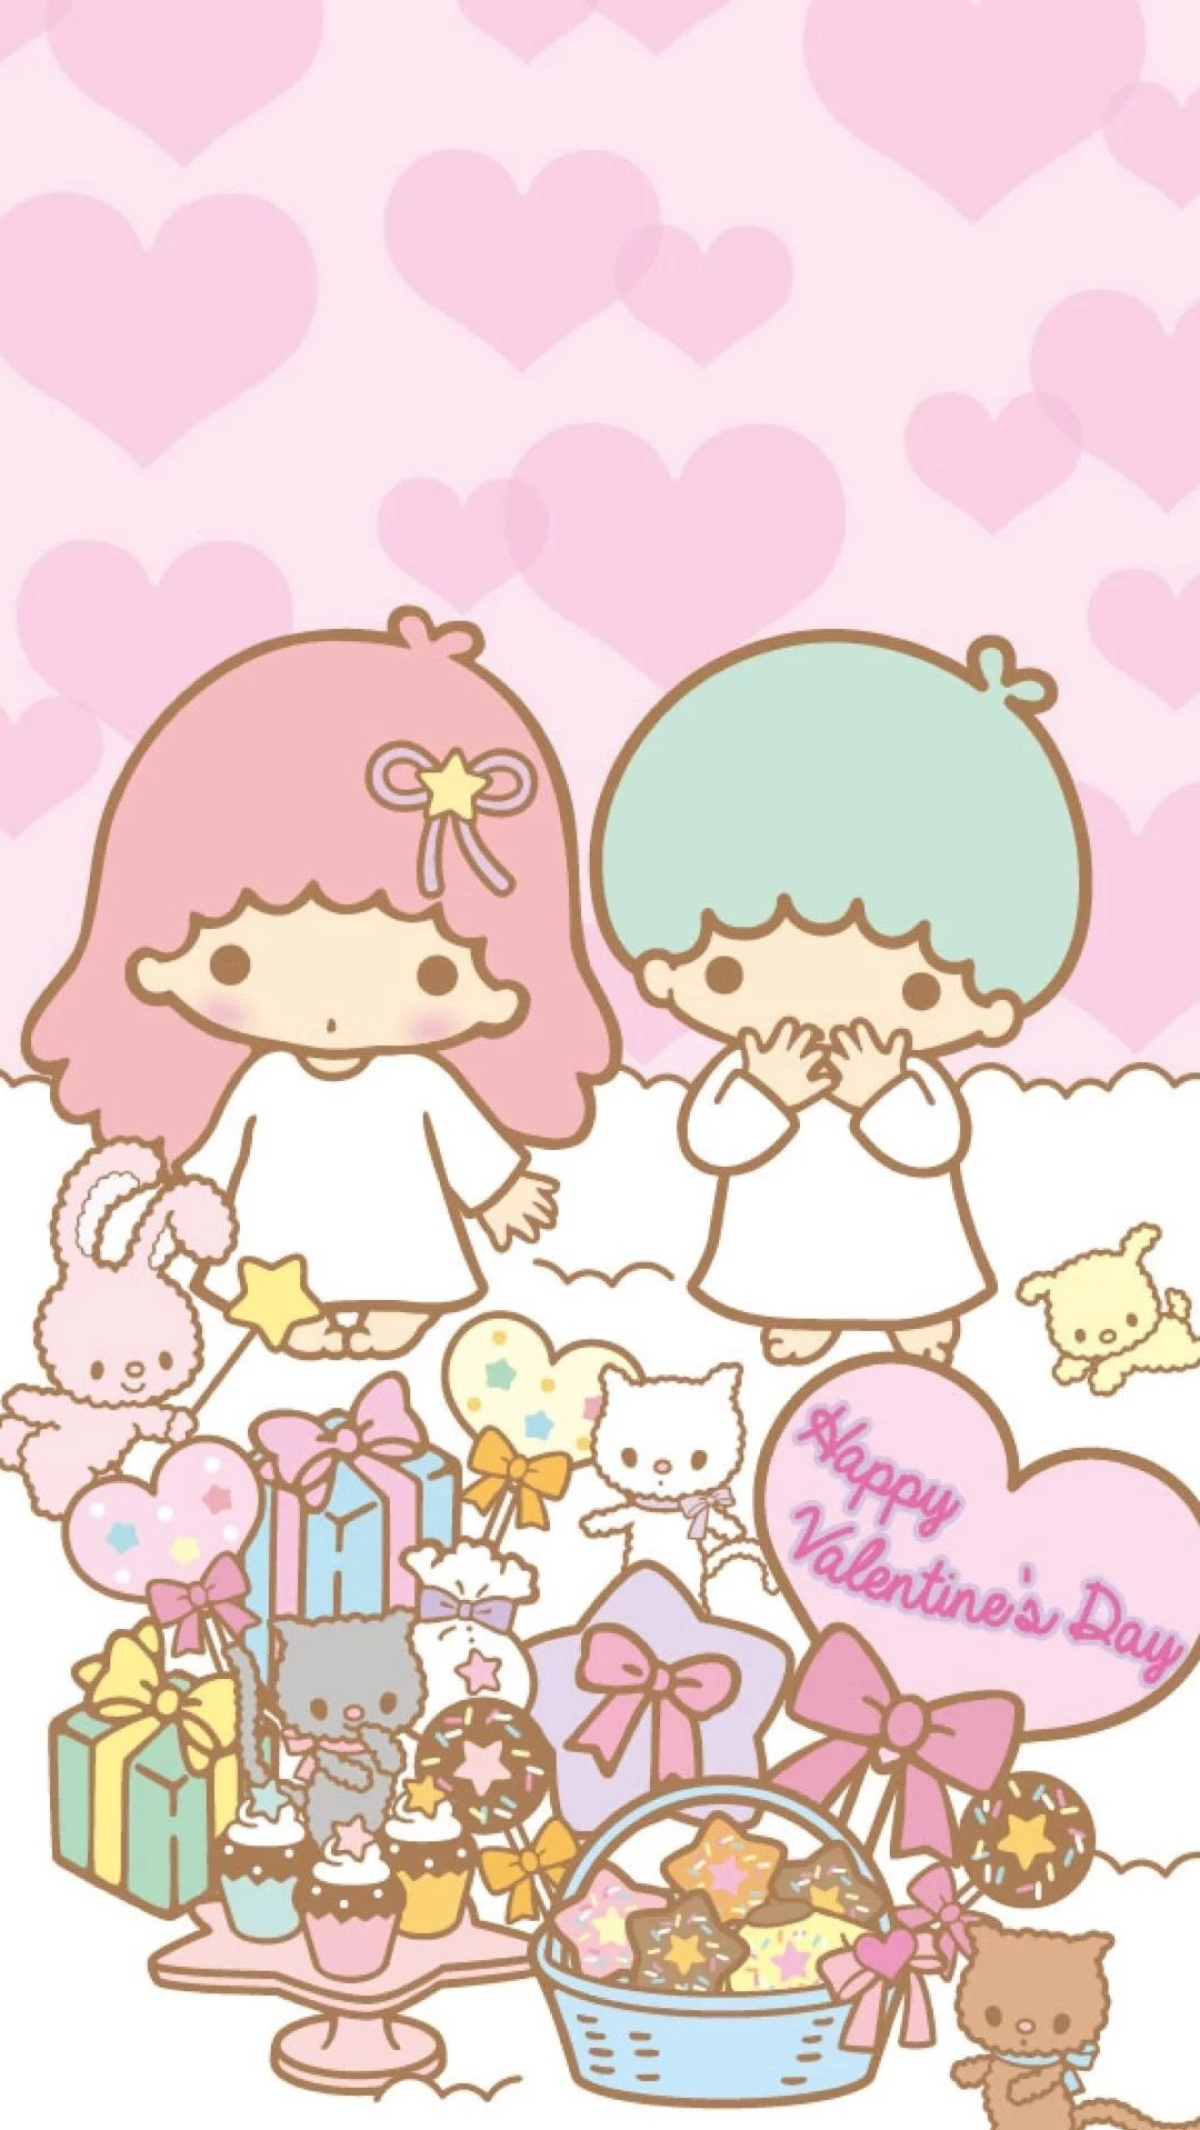 Hello Kitty Valentine's Day, Kawaii Valentine wallpapers, Cute backgrounds, Lovely celebration, 1200x2130 HD Handy